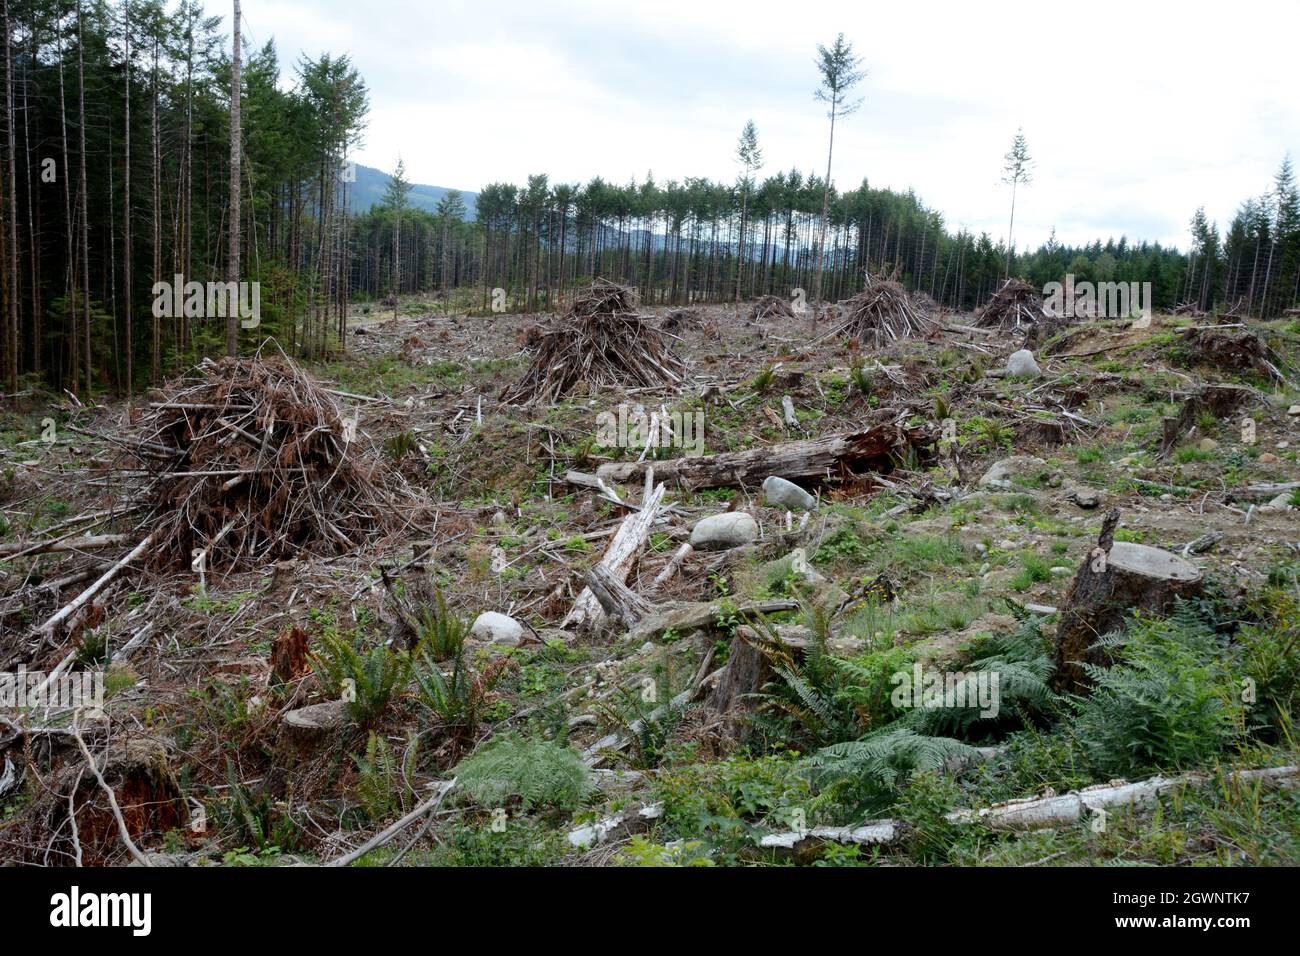 Piles of logging slash and dead tree debris in a clearcut in a forest near Powell RIver, on the Sunshine Coast region of  British Columbia, Canada. Stock Photo